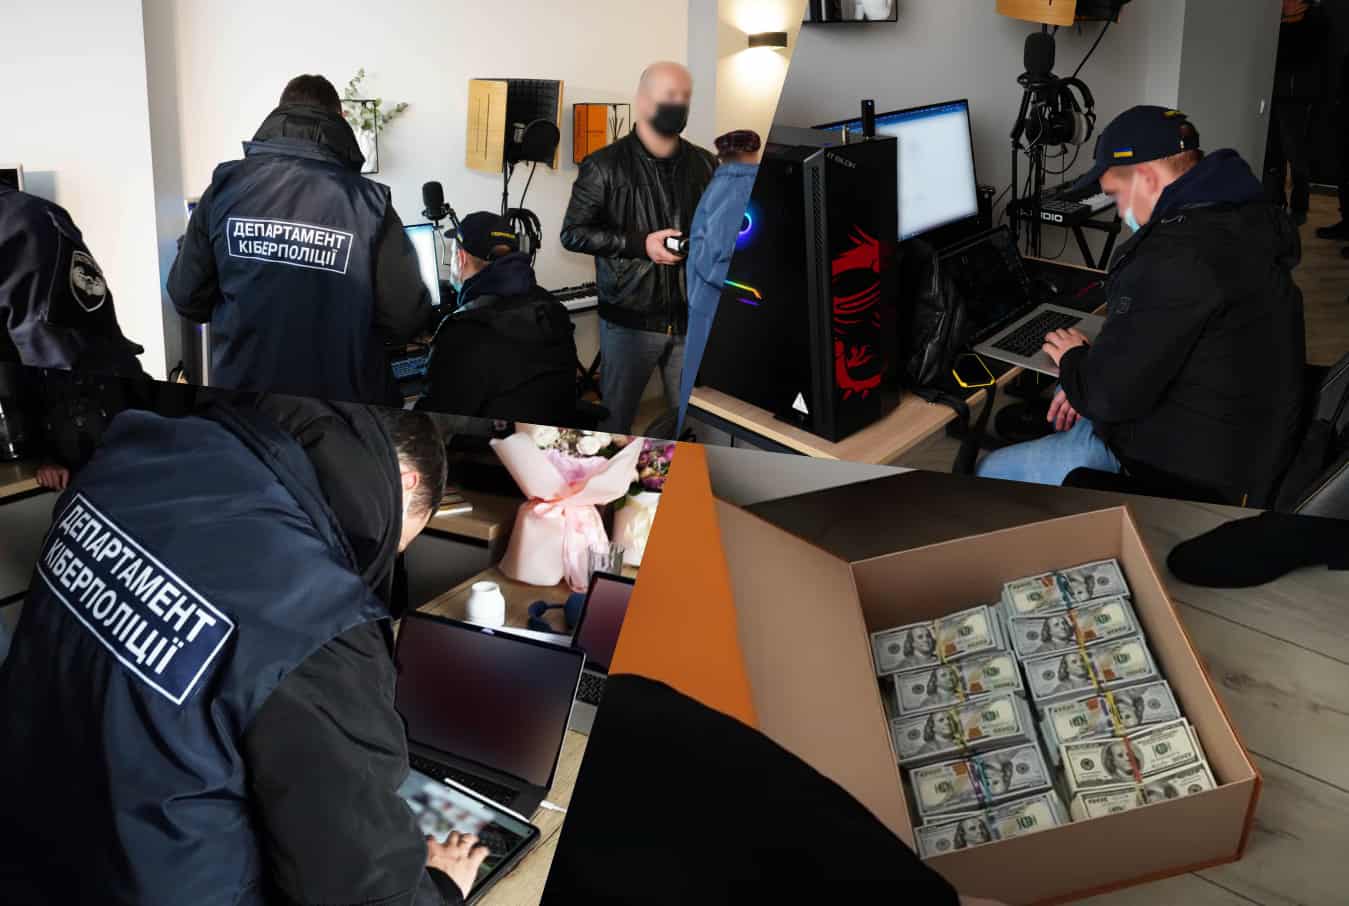 Ransomware gang busted in connection with attacks on 100+ companies